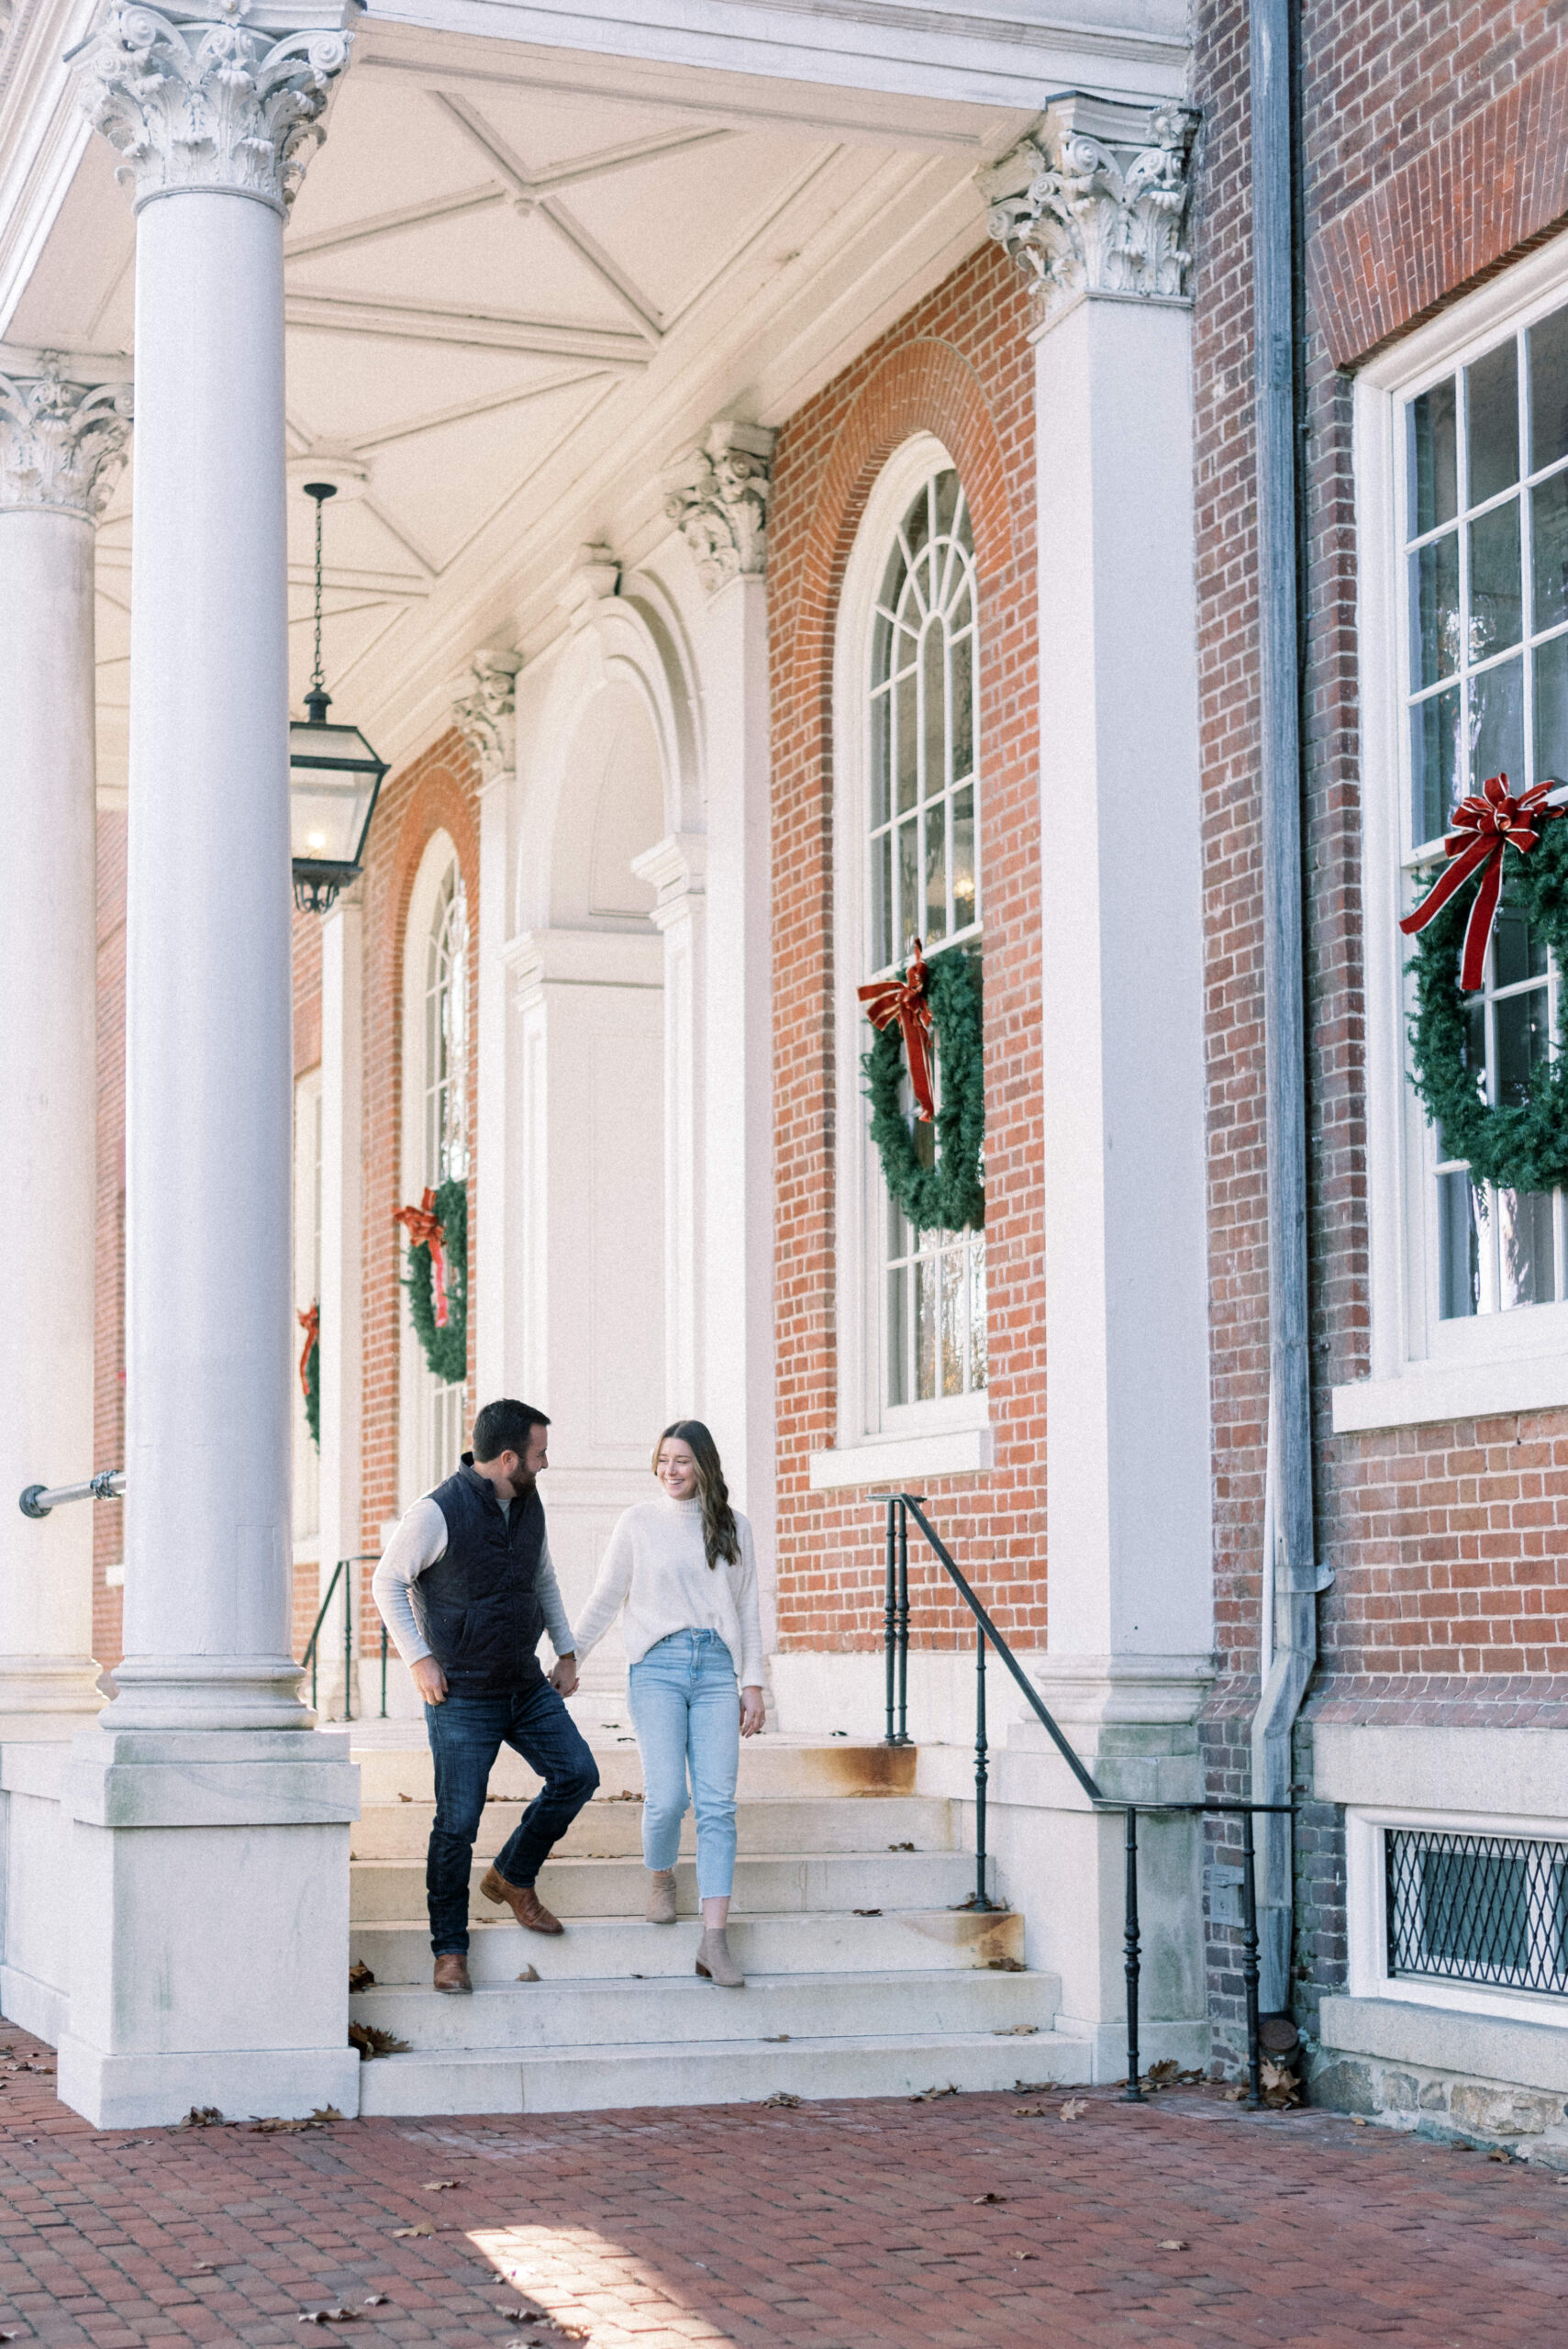 Maryland wedding photographer captures man and woman walking hand in hand downtown